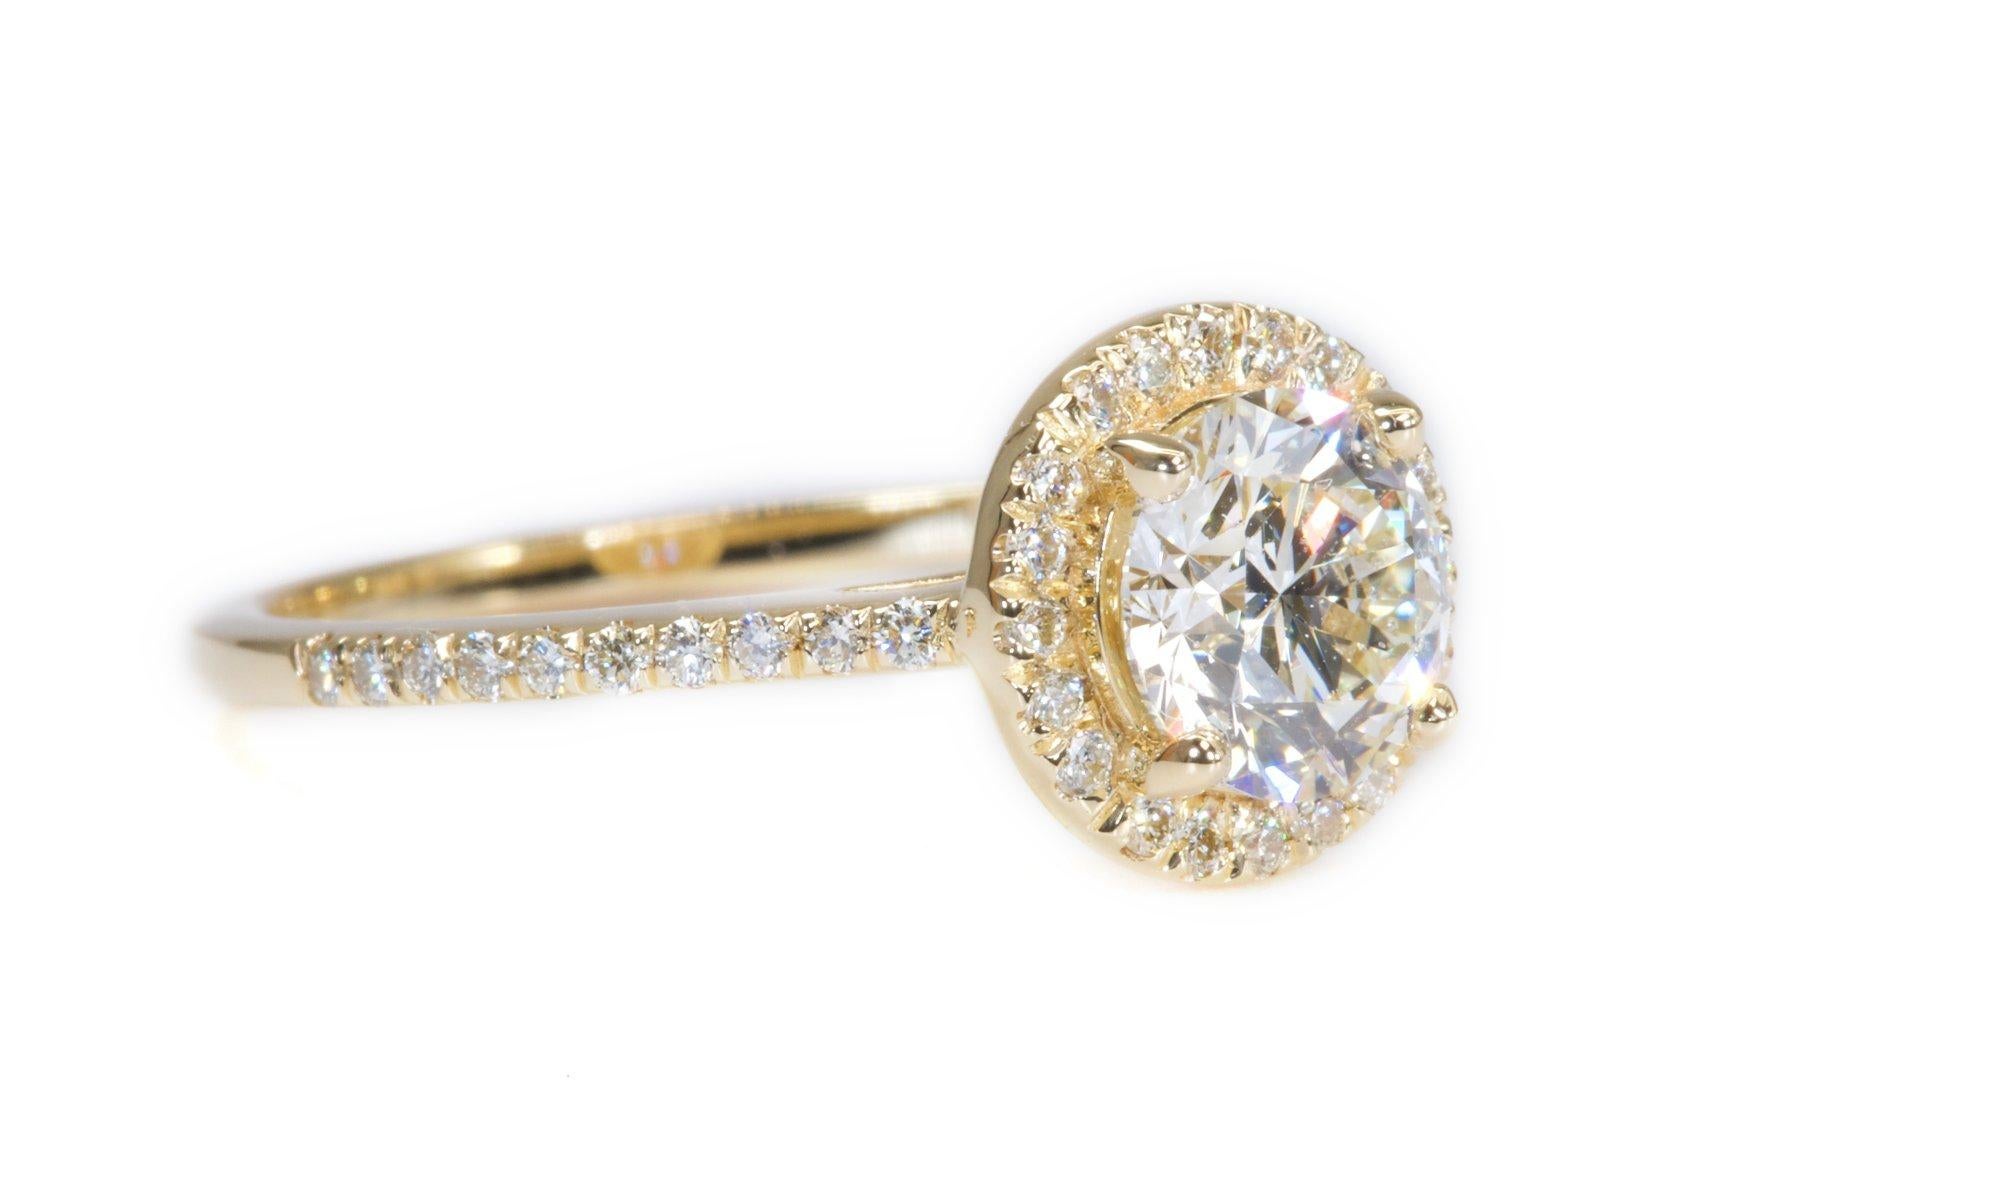 A luxurious halo solitaire ring with a dazzling 1.07 carat round brilliant natural diamond in H VS2 ideal cut. The jewelry is made of 18K yellow gold with a high quality polish. The main stone is engraved with a laser inscription and has a GIA